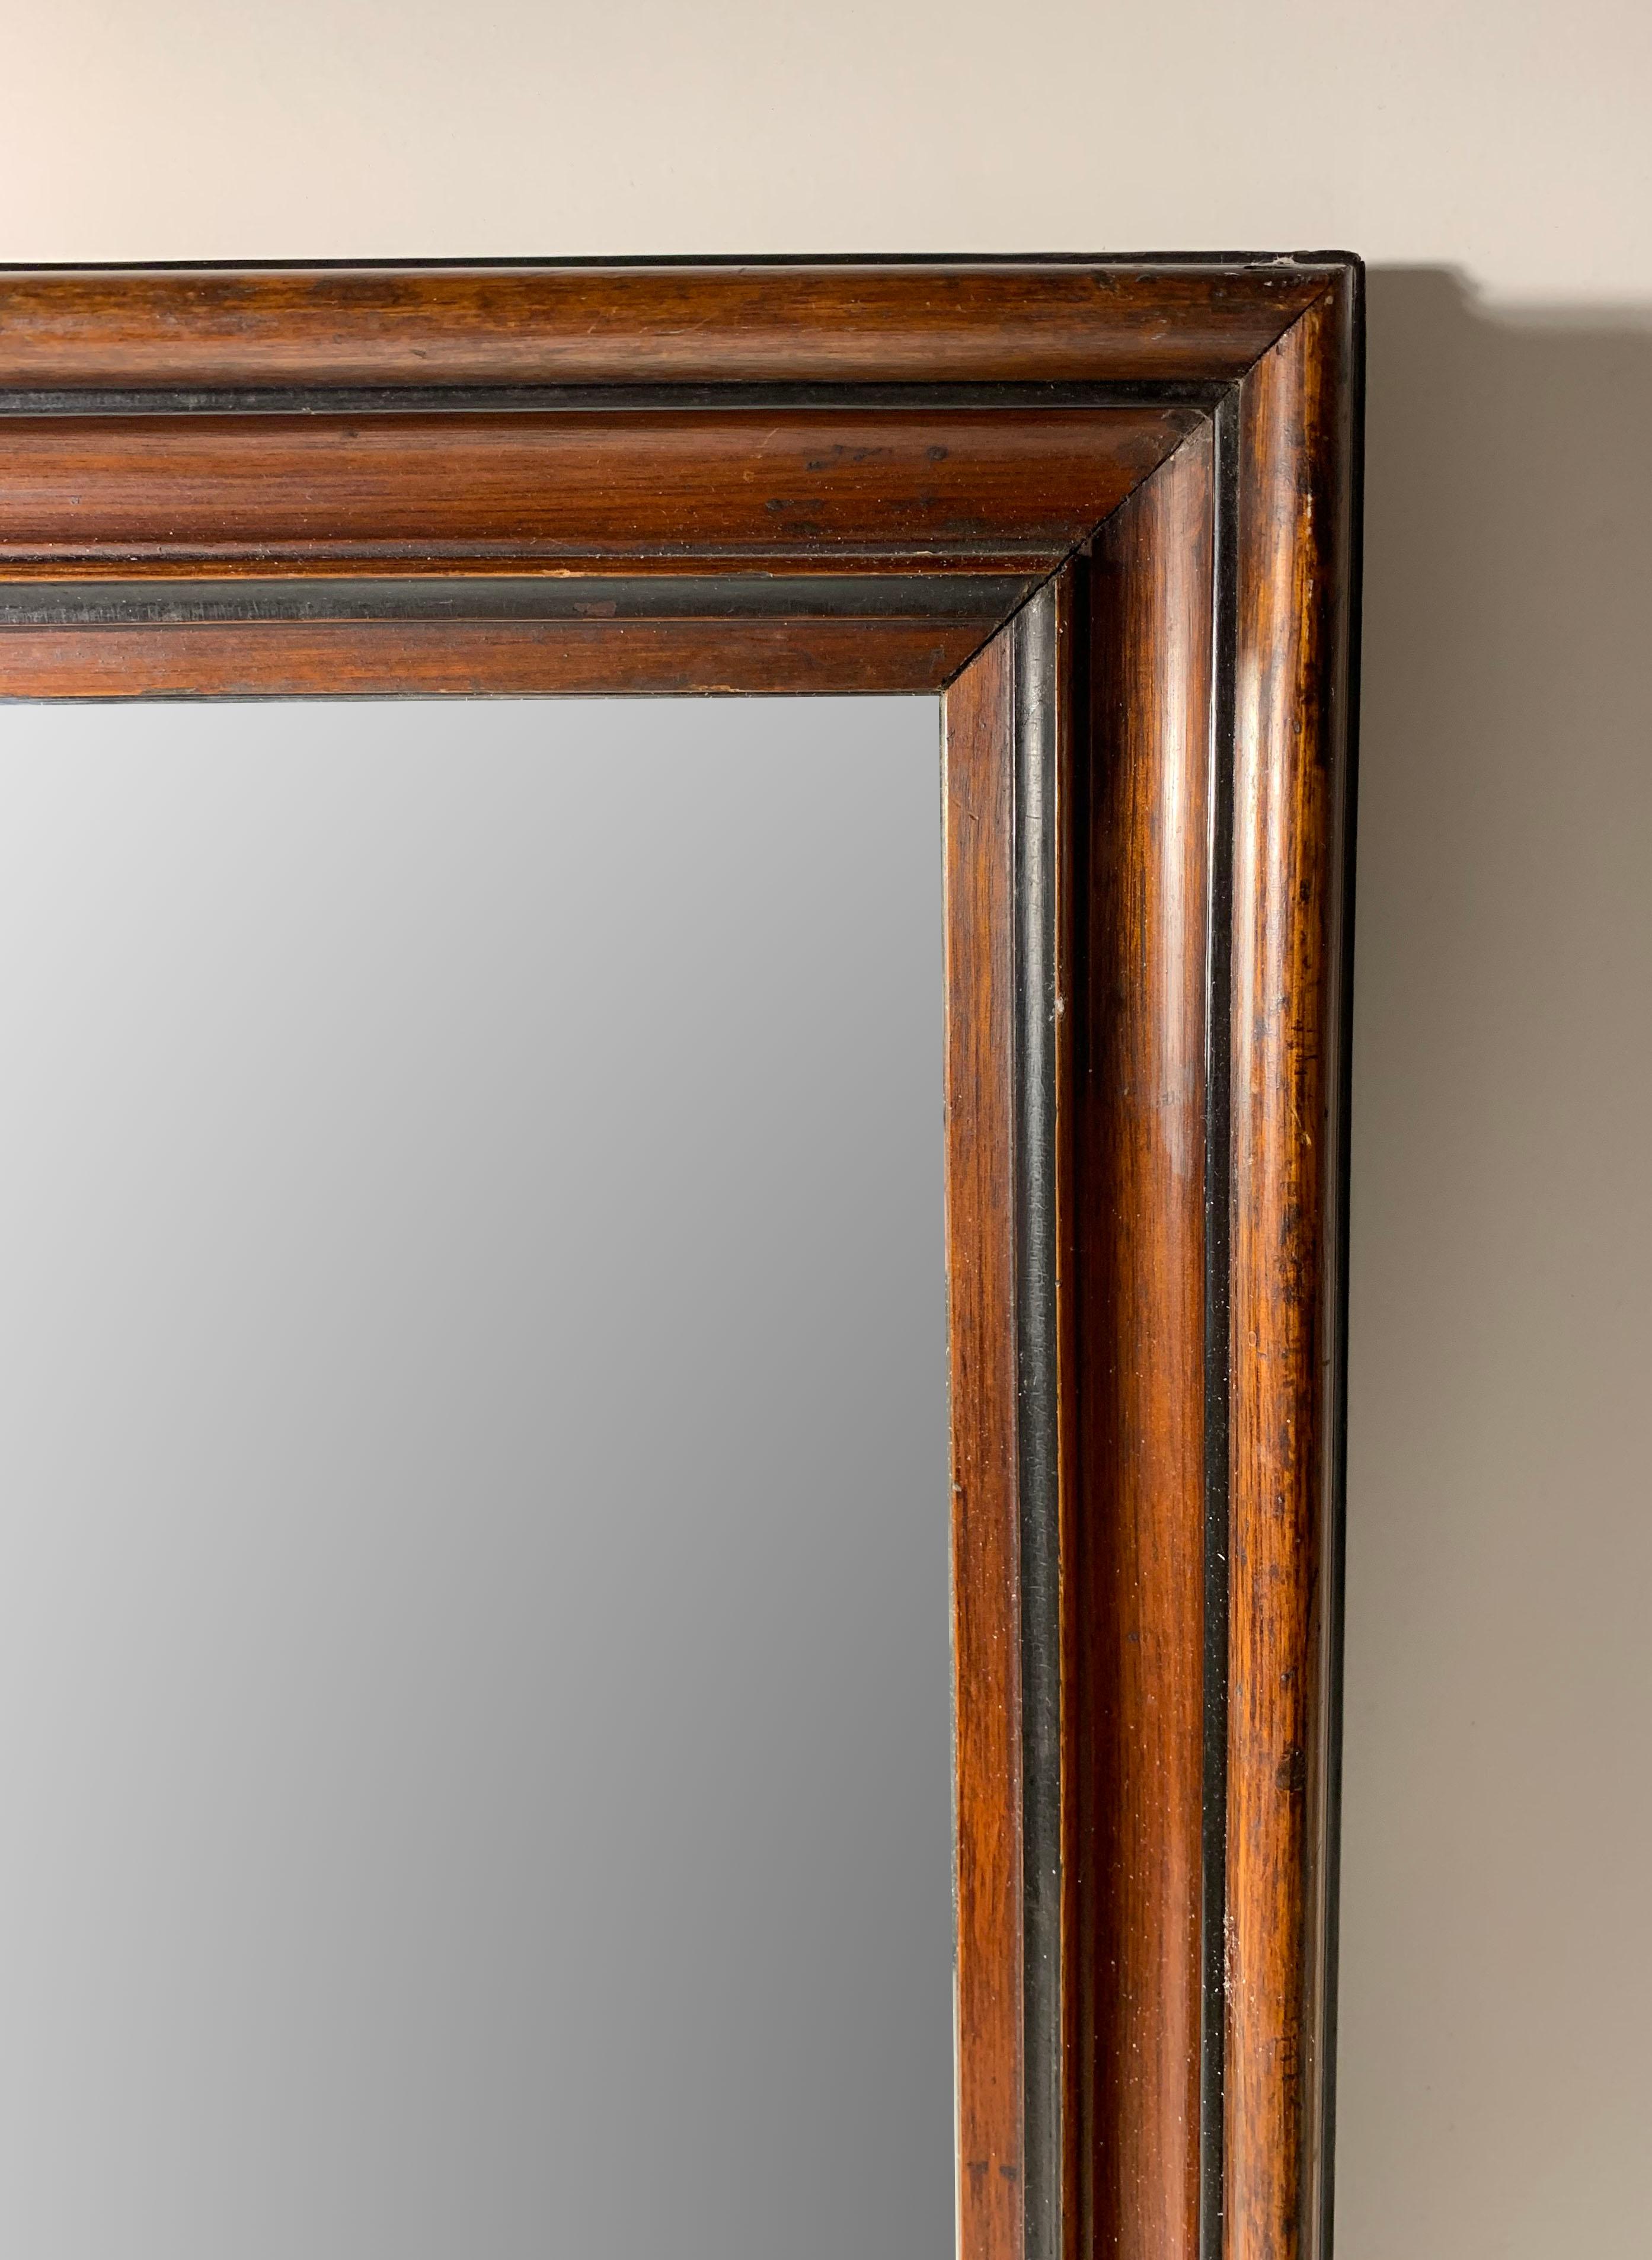 American Antique 19th Century Victorian Ebonized Banding Mirror / Frame For Sale